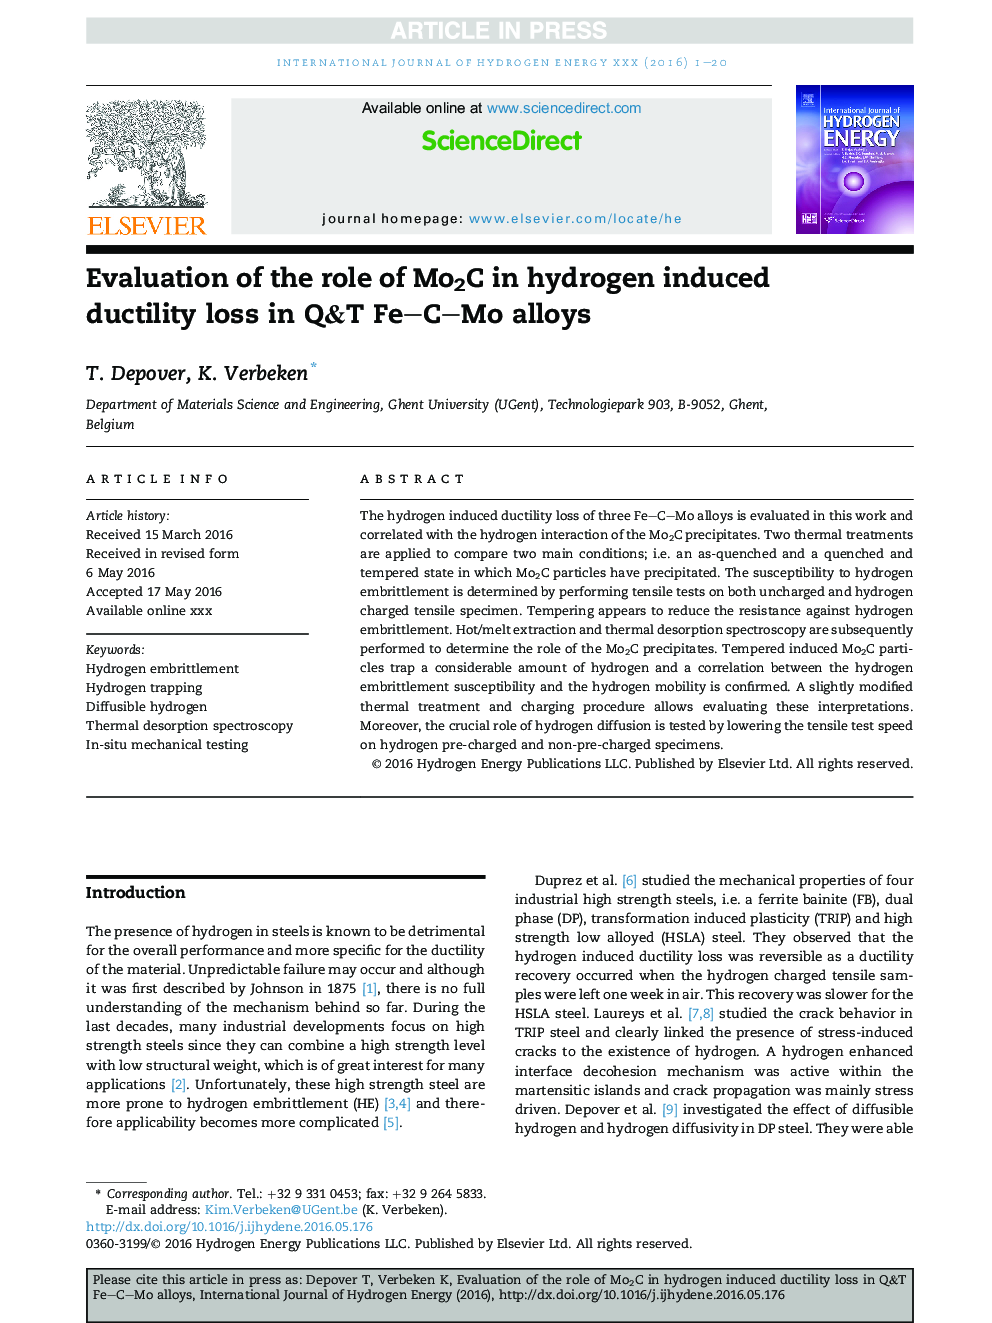 Evaluation of the role of Mo2C in hydrogen induced ductility loss in Q&T FeCMo alloys